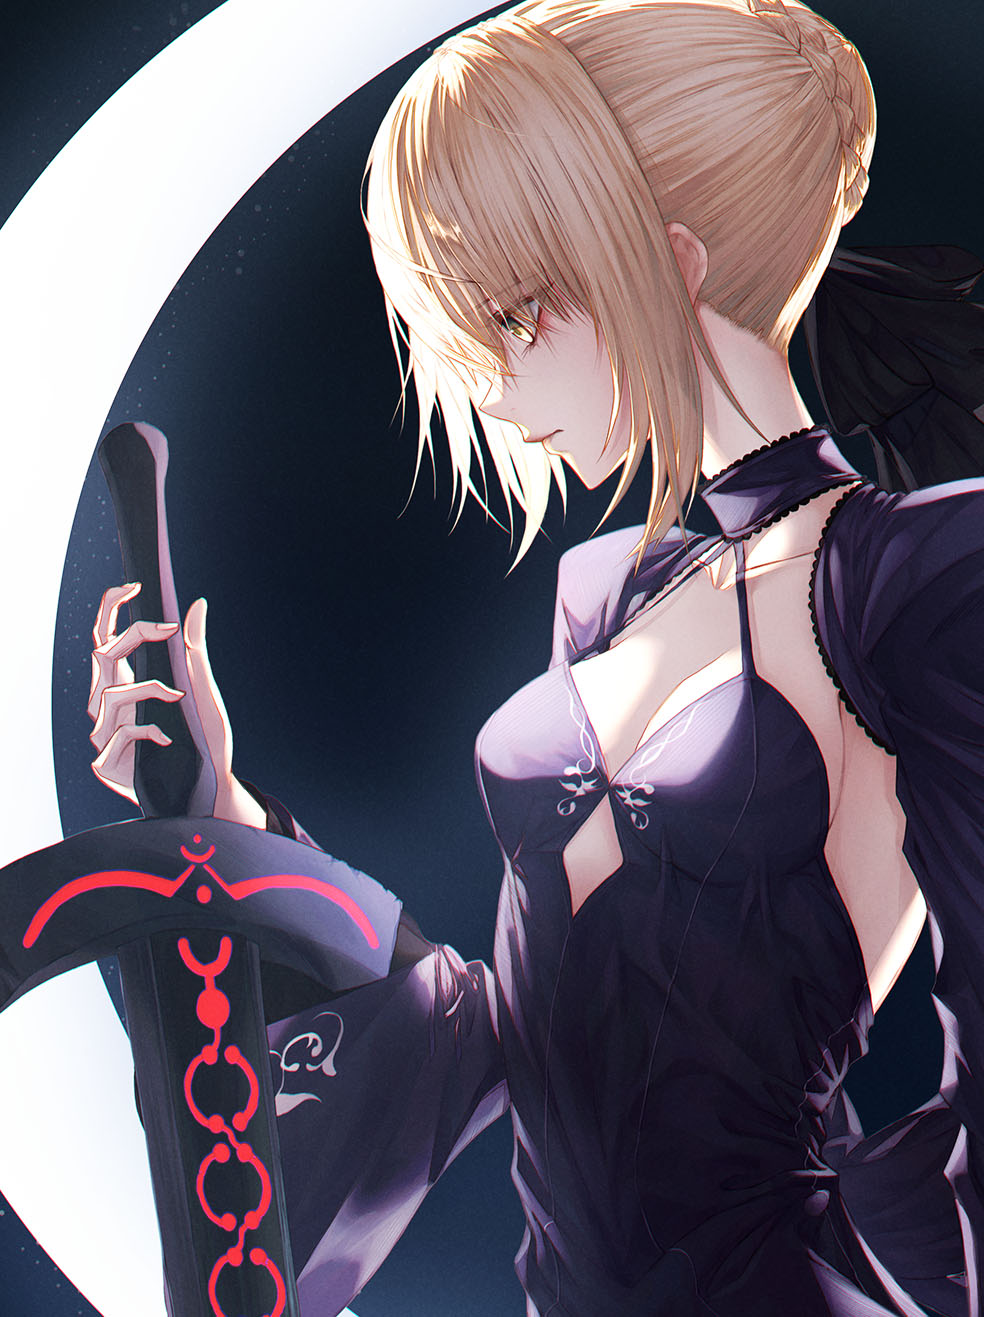 Anime 984x1317 Fate series Fate/Grand Order Fate/Stay Night fate/stay night: heaven's feel anime girls 2D fan art portrait display black dress small boobs fantasy weapon yellow eyes cleavage sword Saber Alter blonde Artoria Pendragon